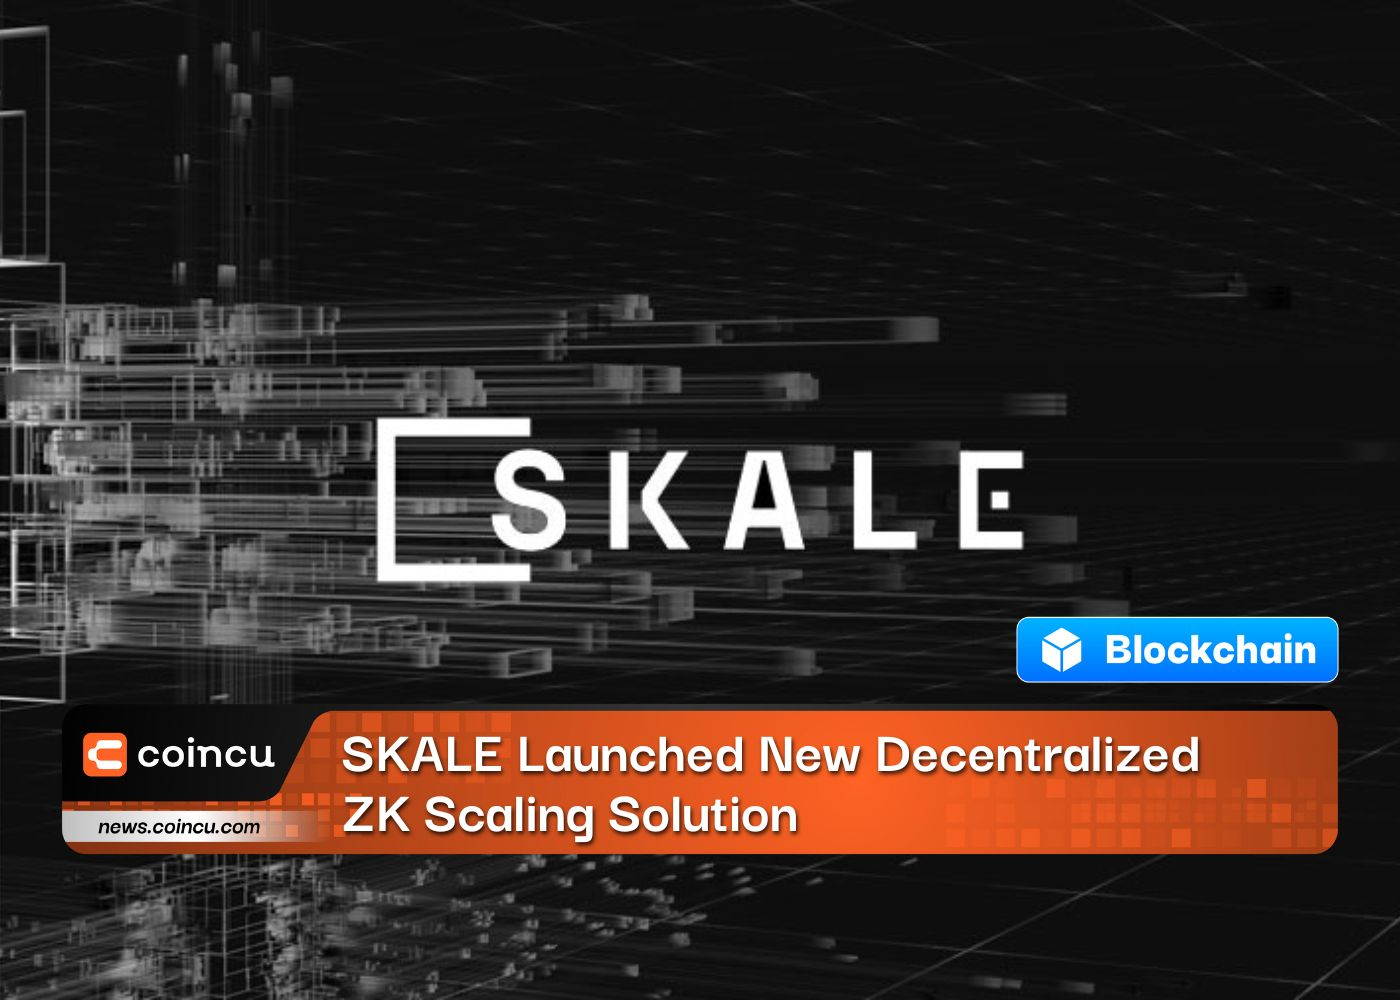 SKALE Launched New Decentralized ZK Scaling Solution